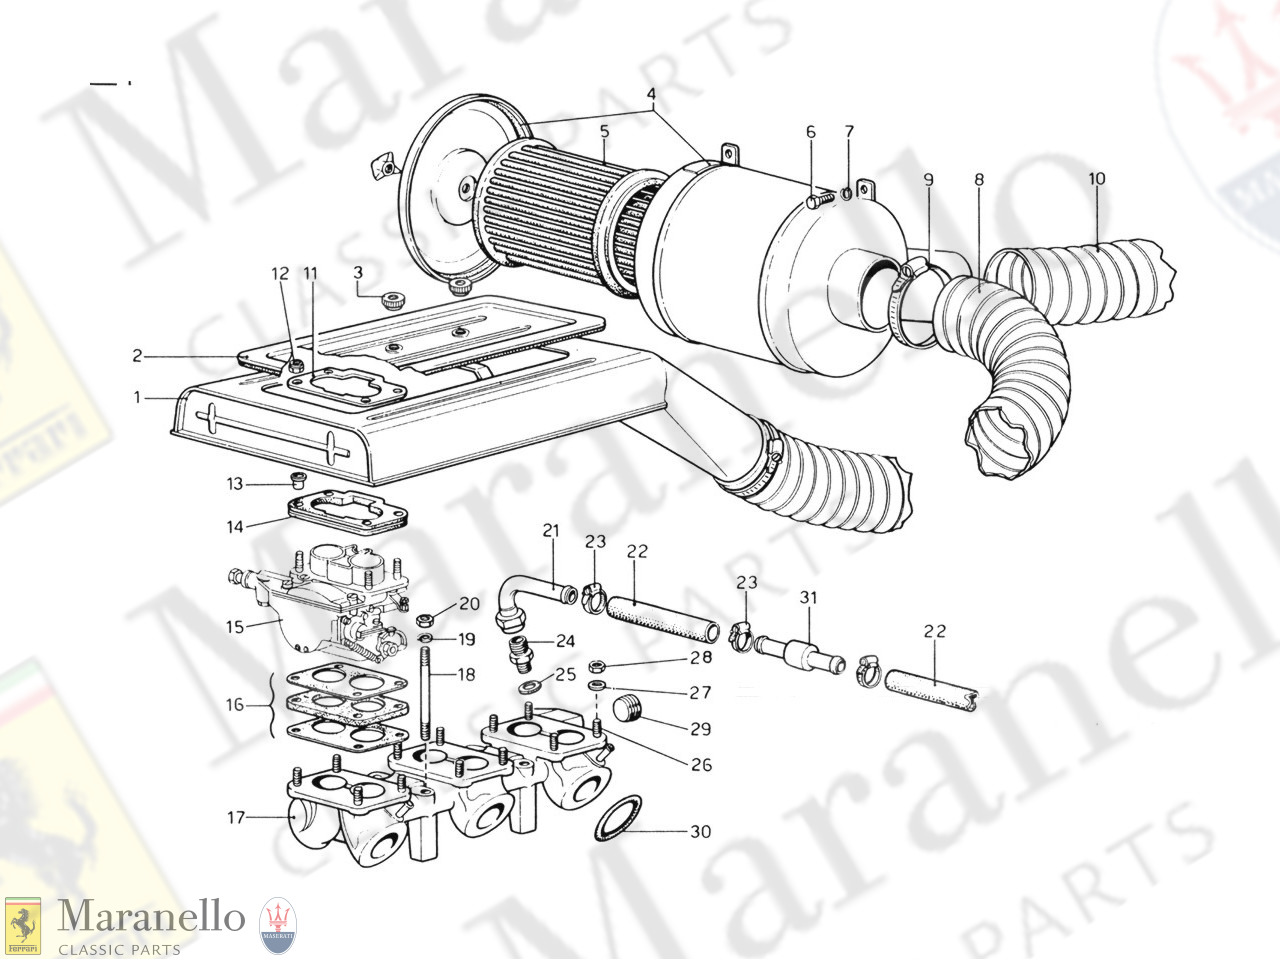 009 - Air Filter And Manifolds